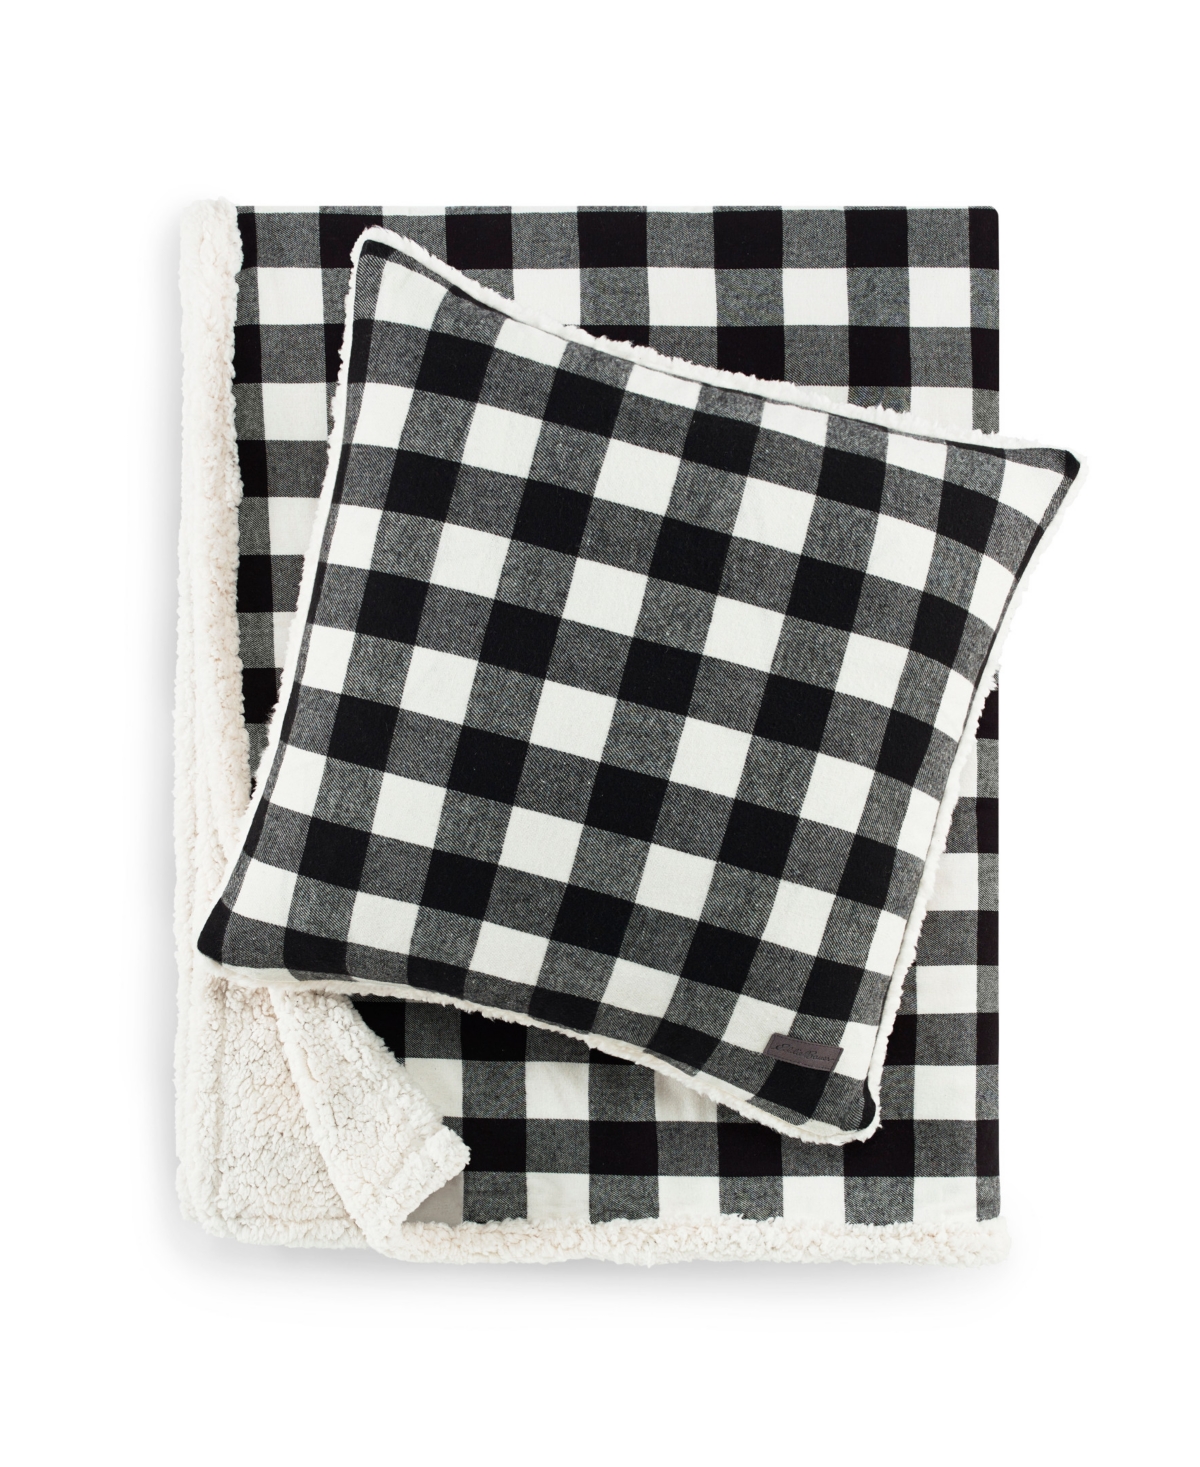 Eddie Bauer Closeout!  Cabin Plaid Cotton Yarn Dyed Flannel Throw Pillow And Blanket Set In Black